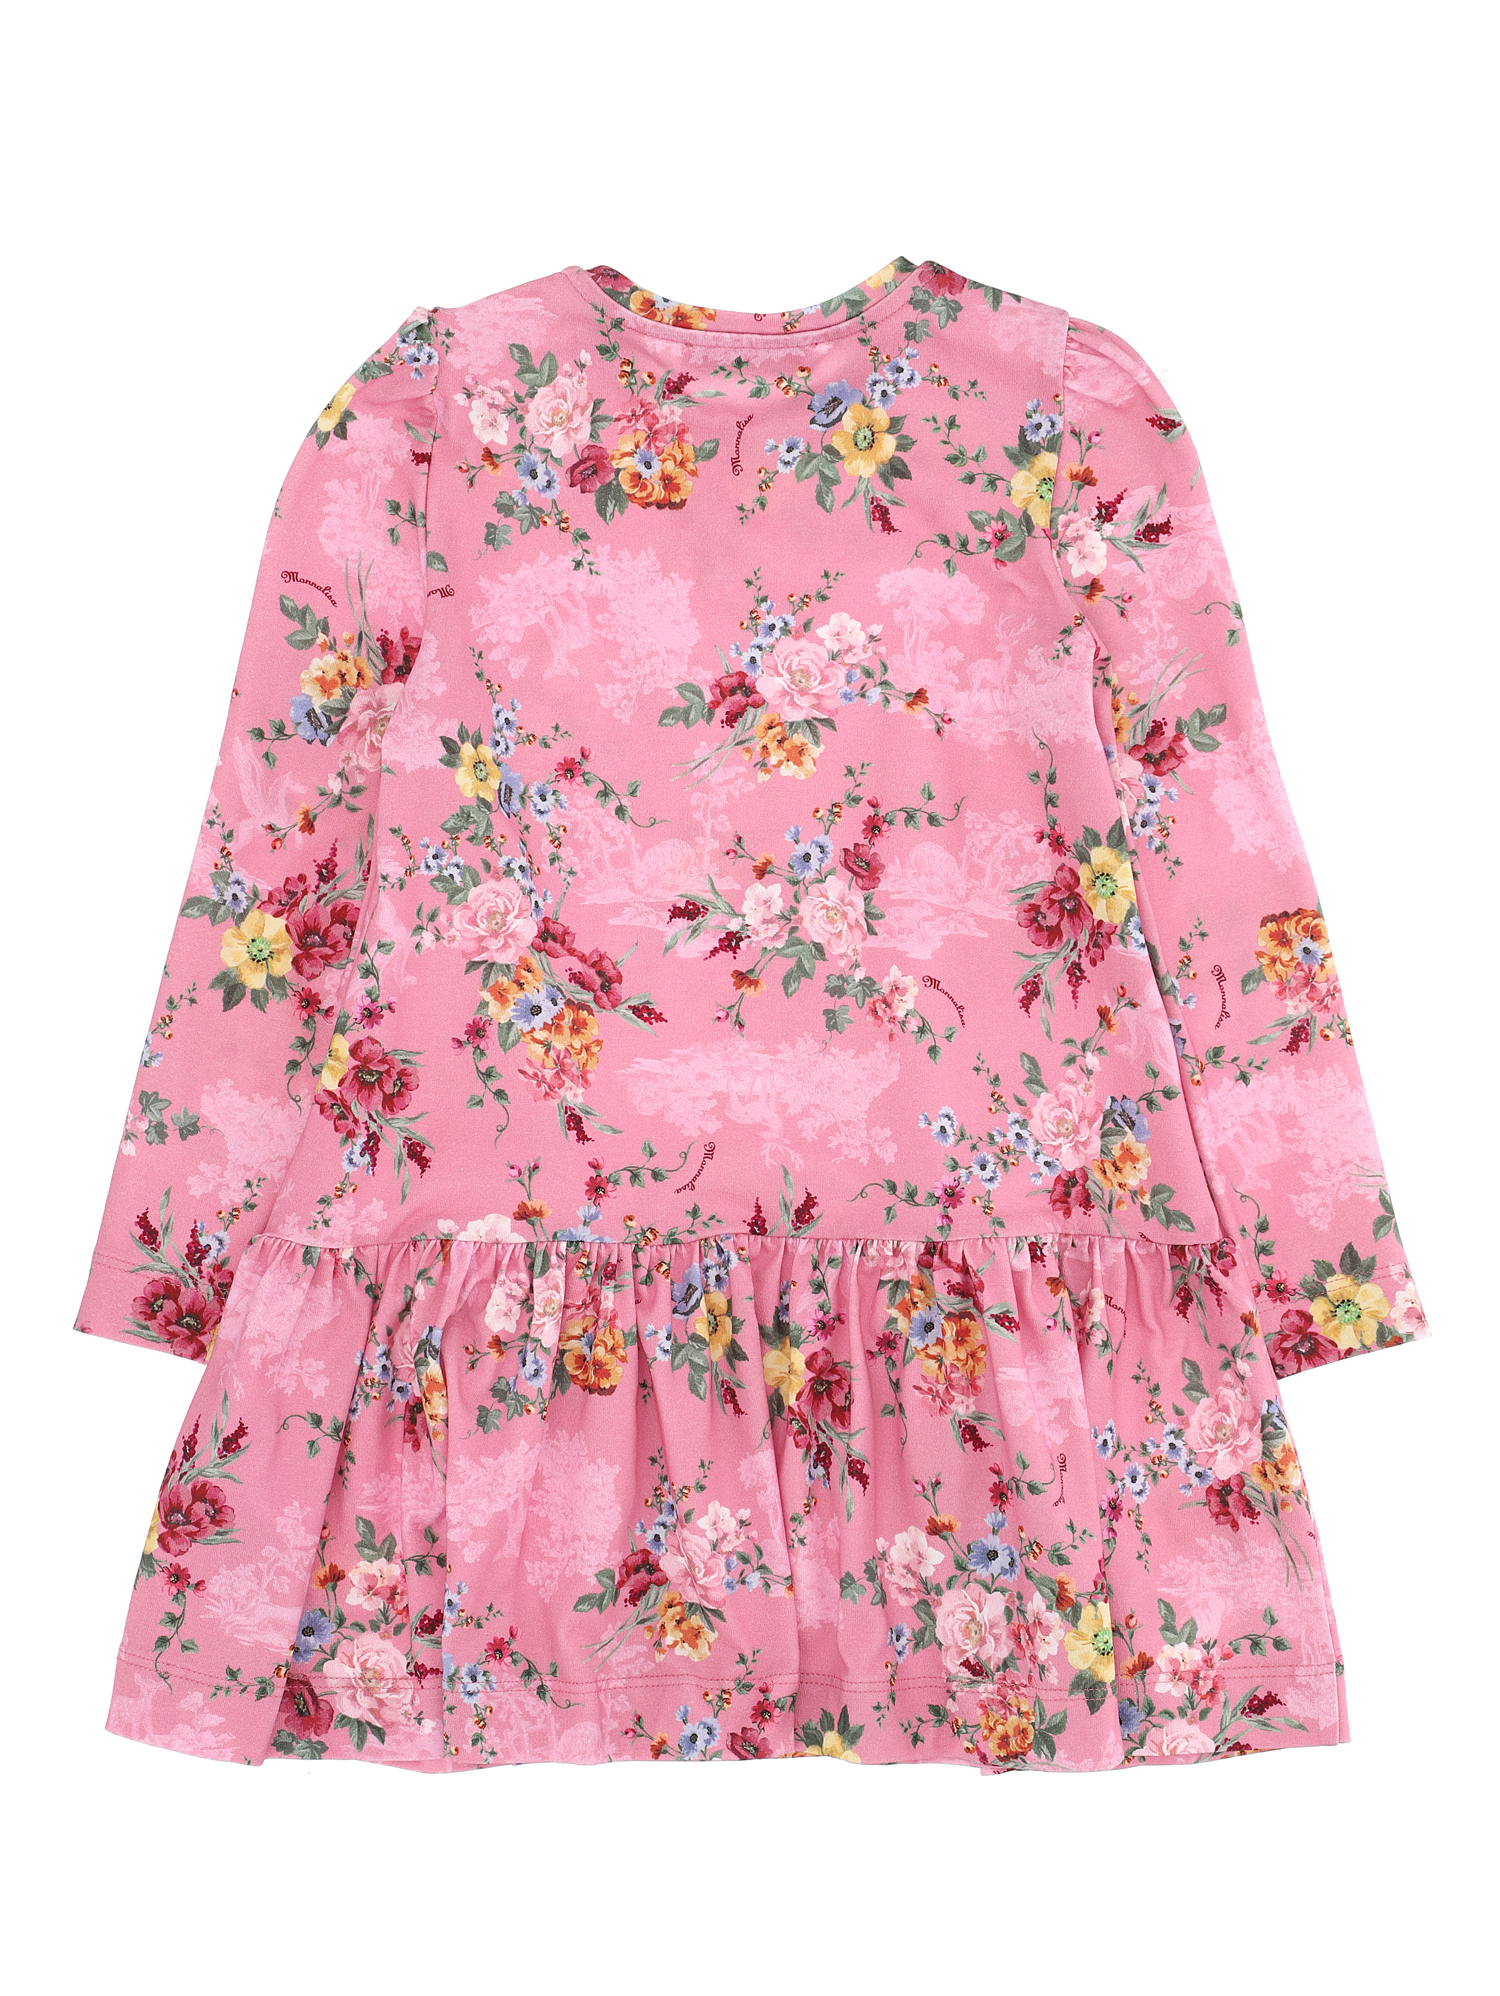 Low-waisted floral jersey dress Monnalisa Girls Clothing Dresses Casual Dresses 